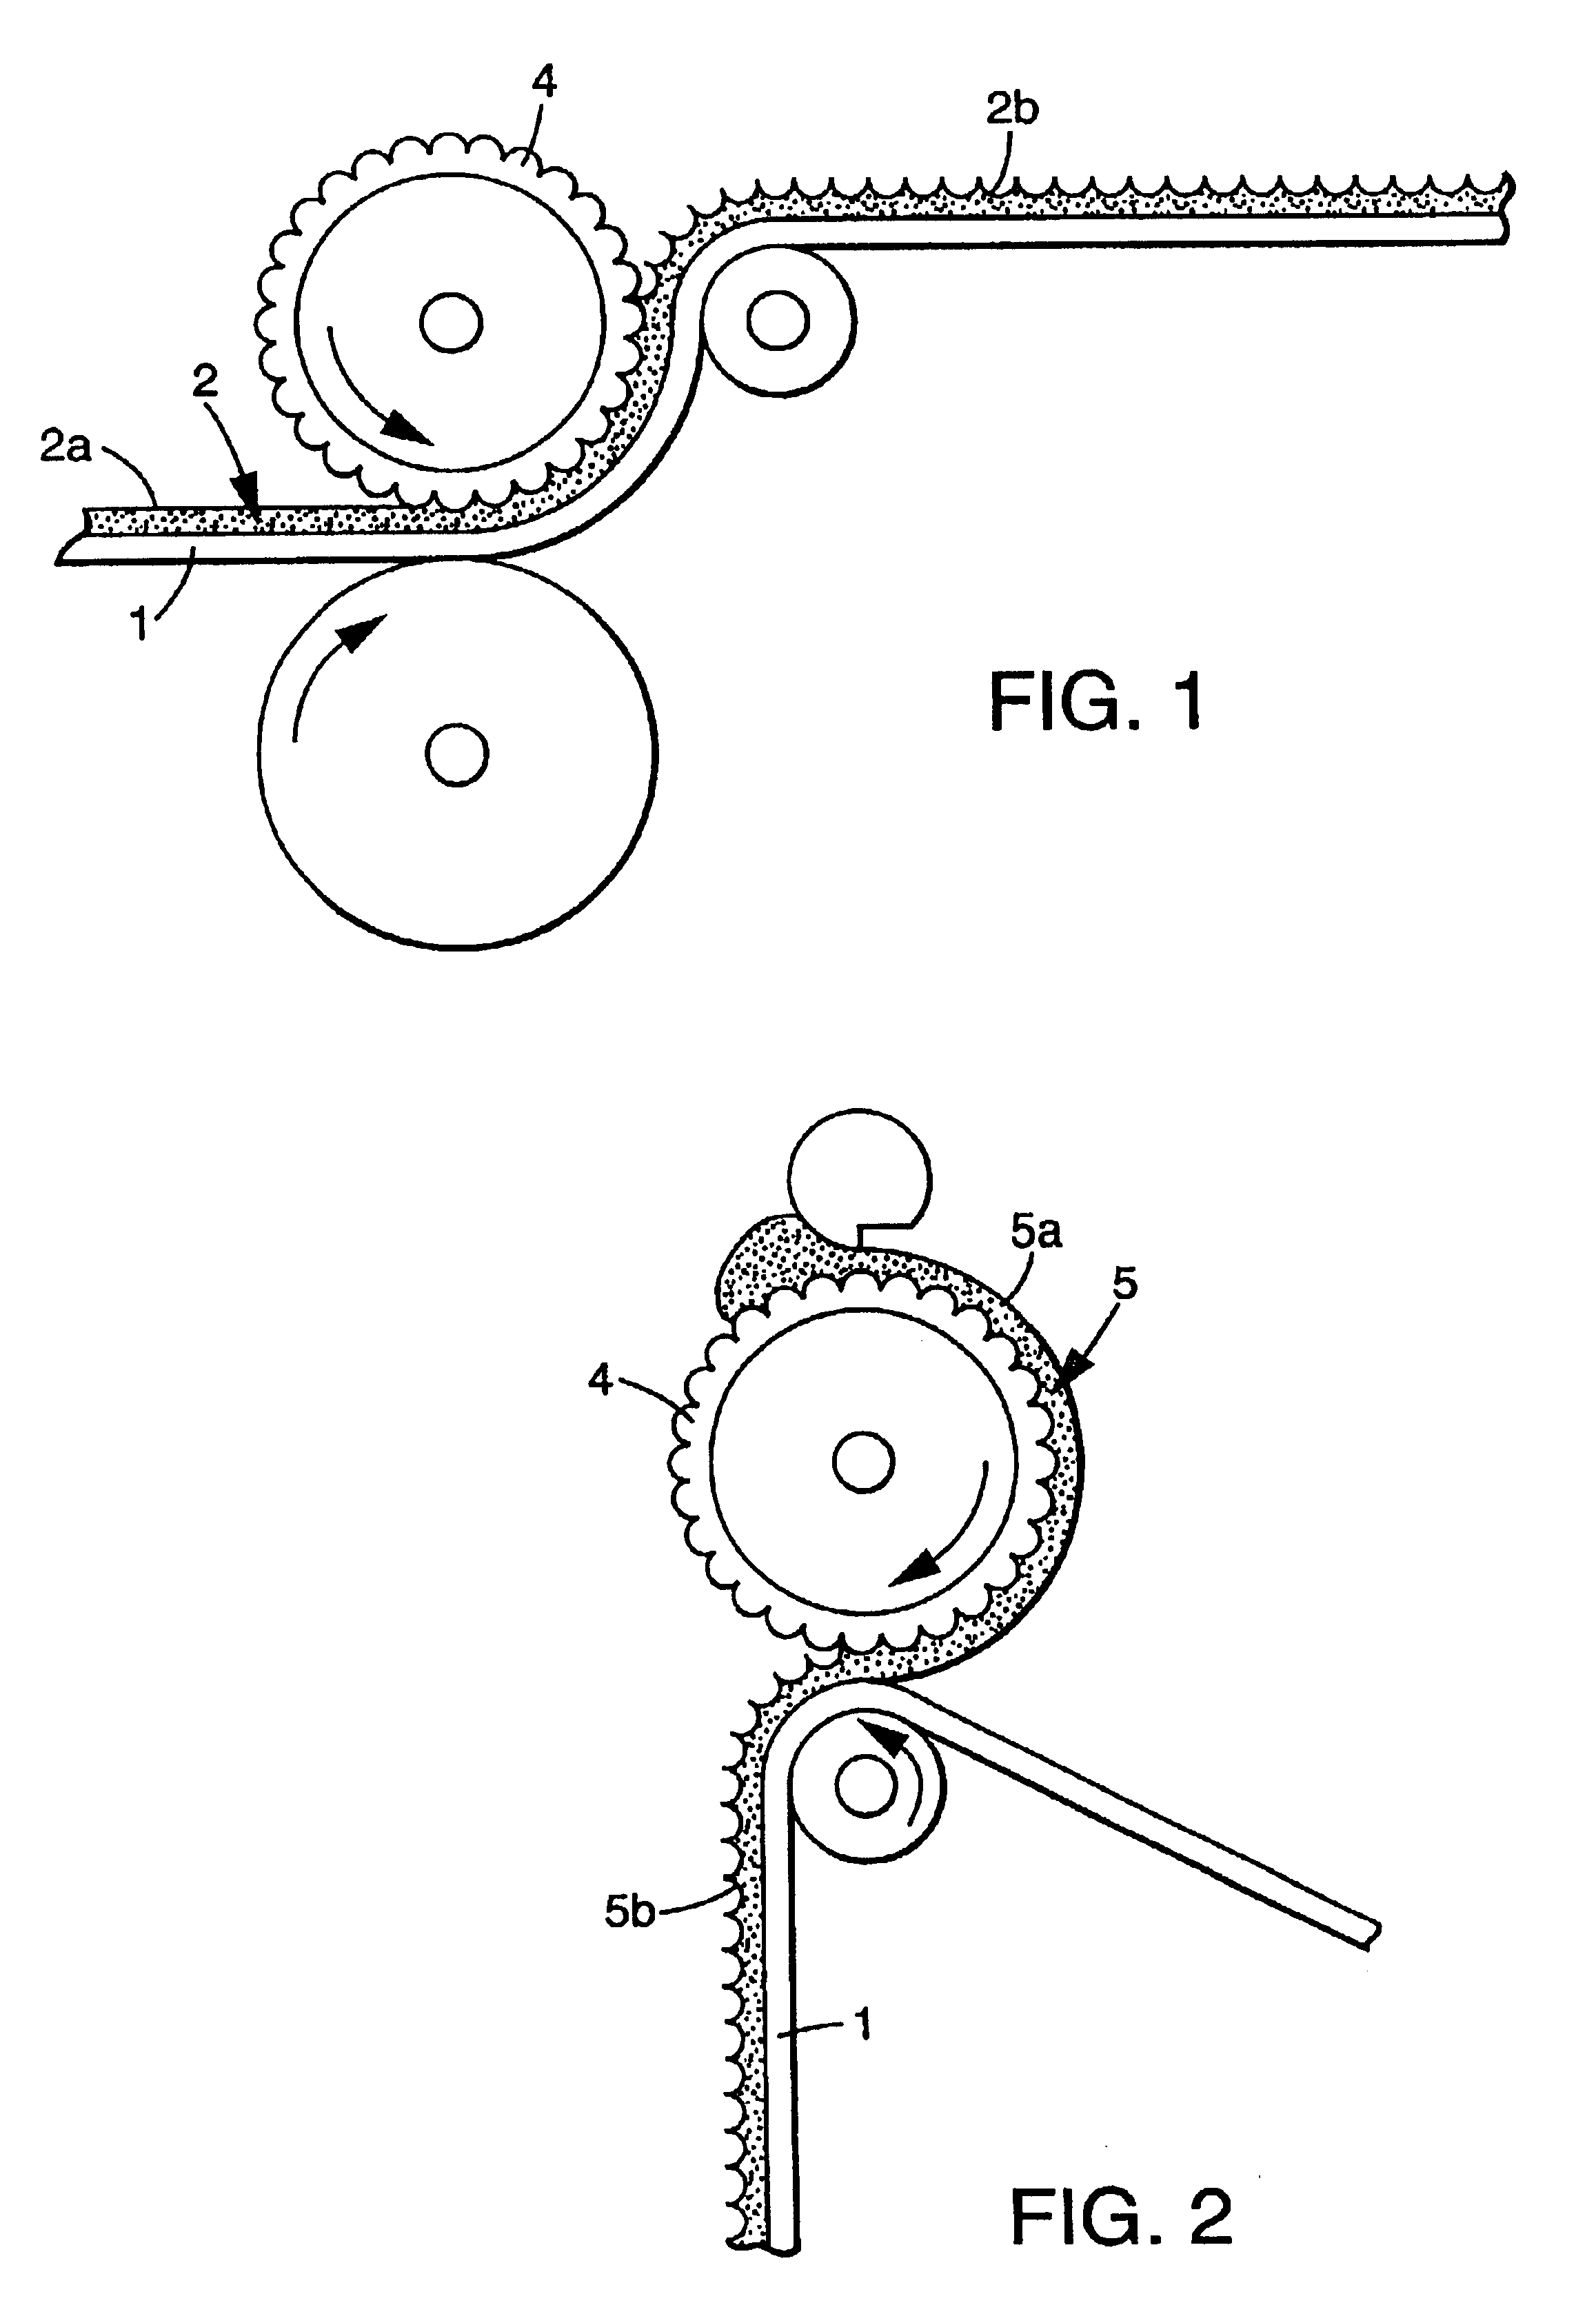 Pressure-sensitive adhesives having microstructured surfaces